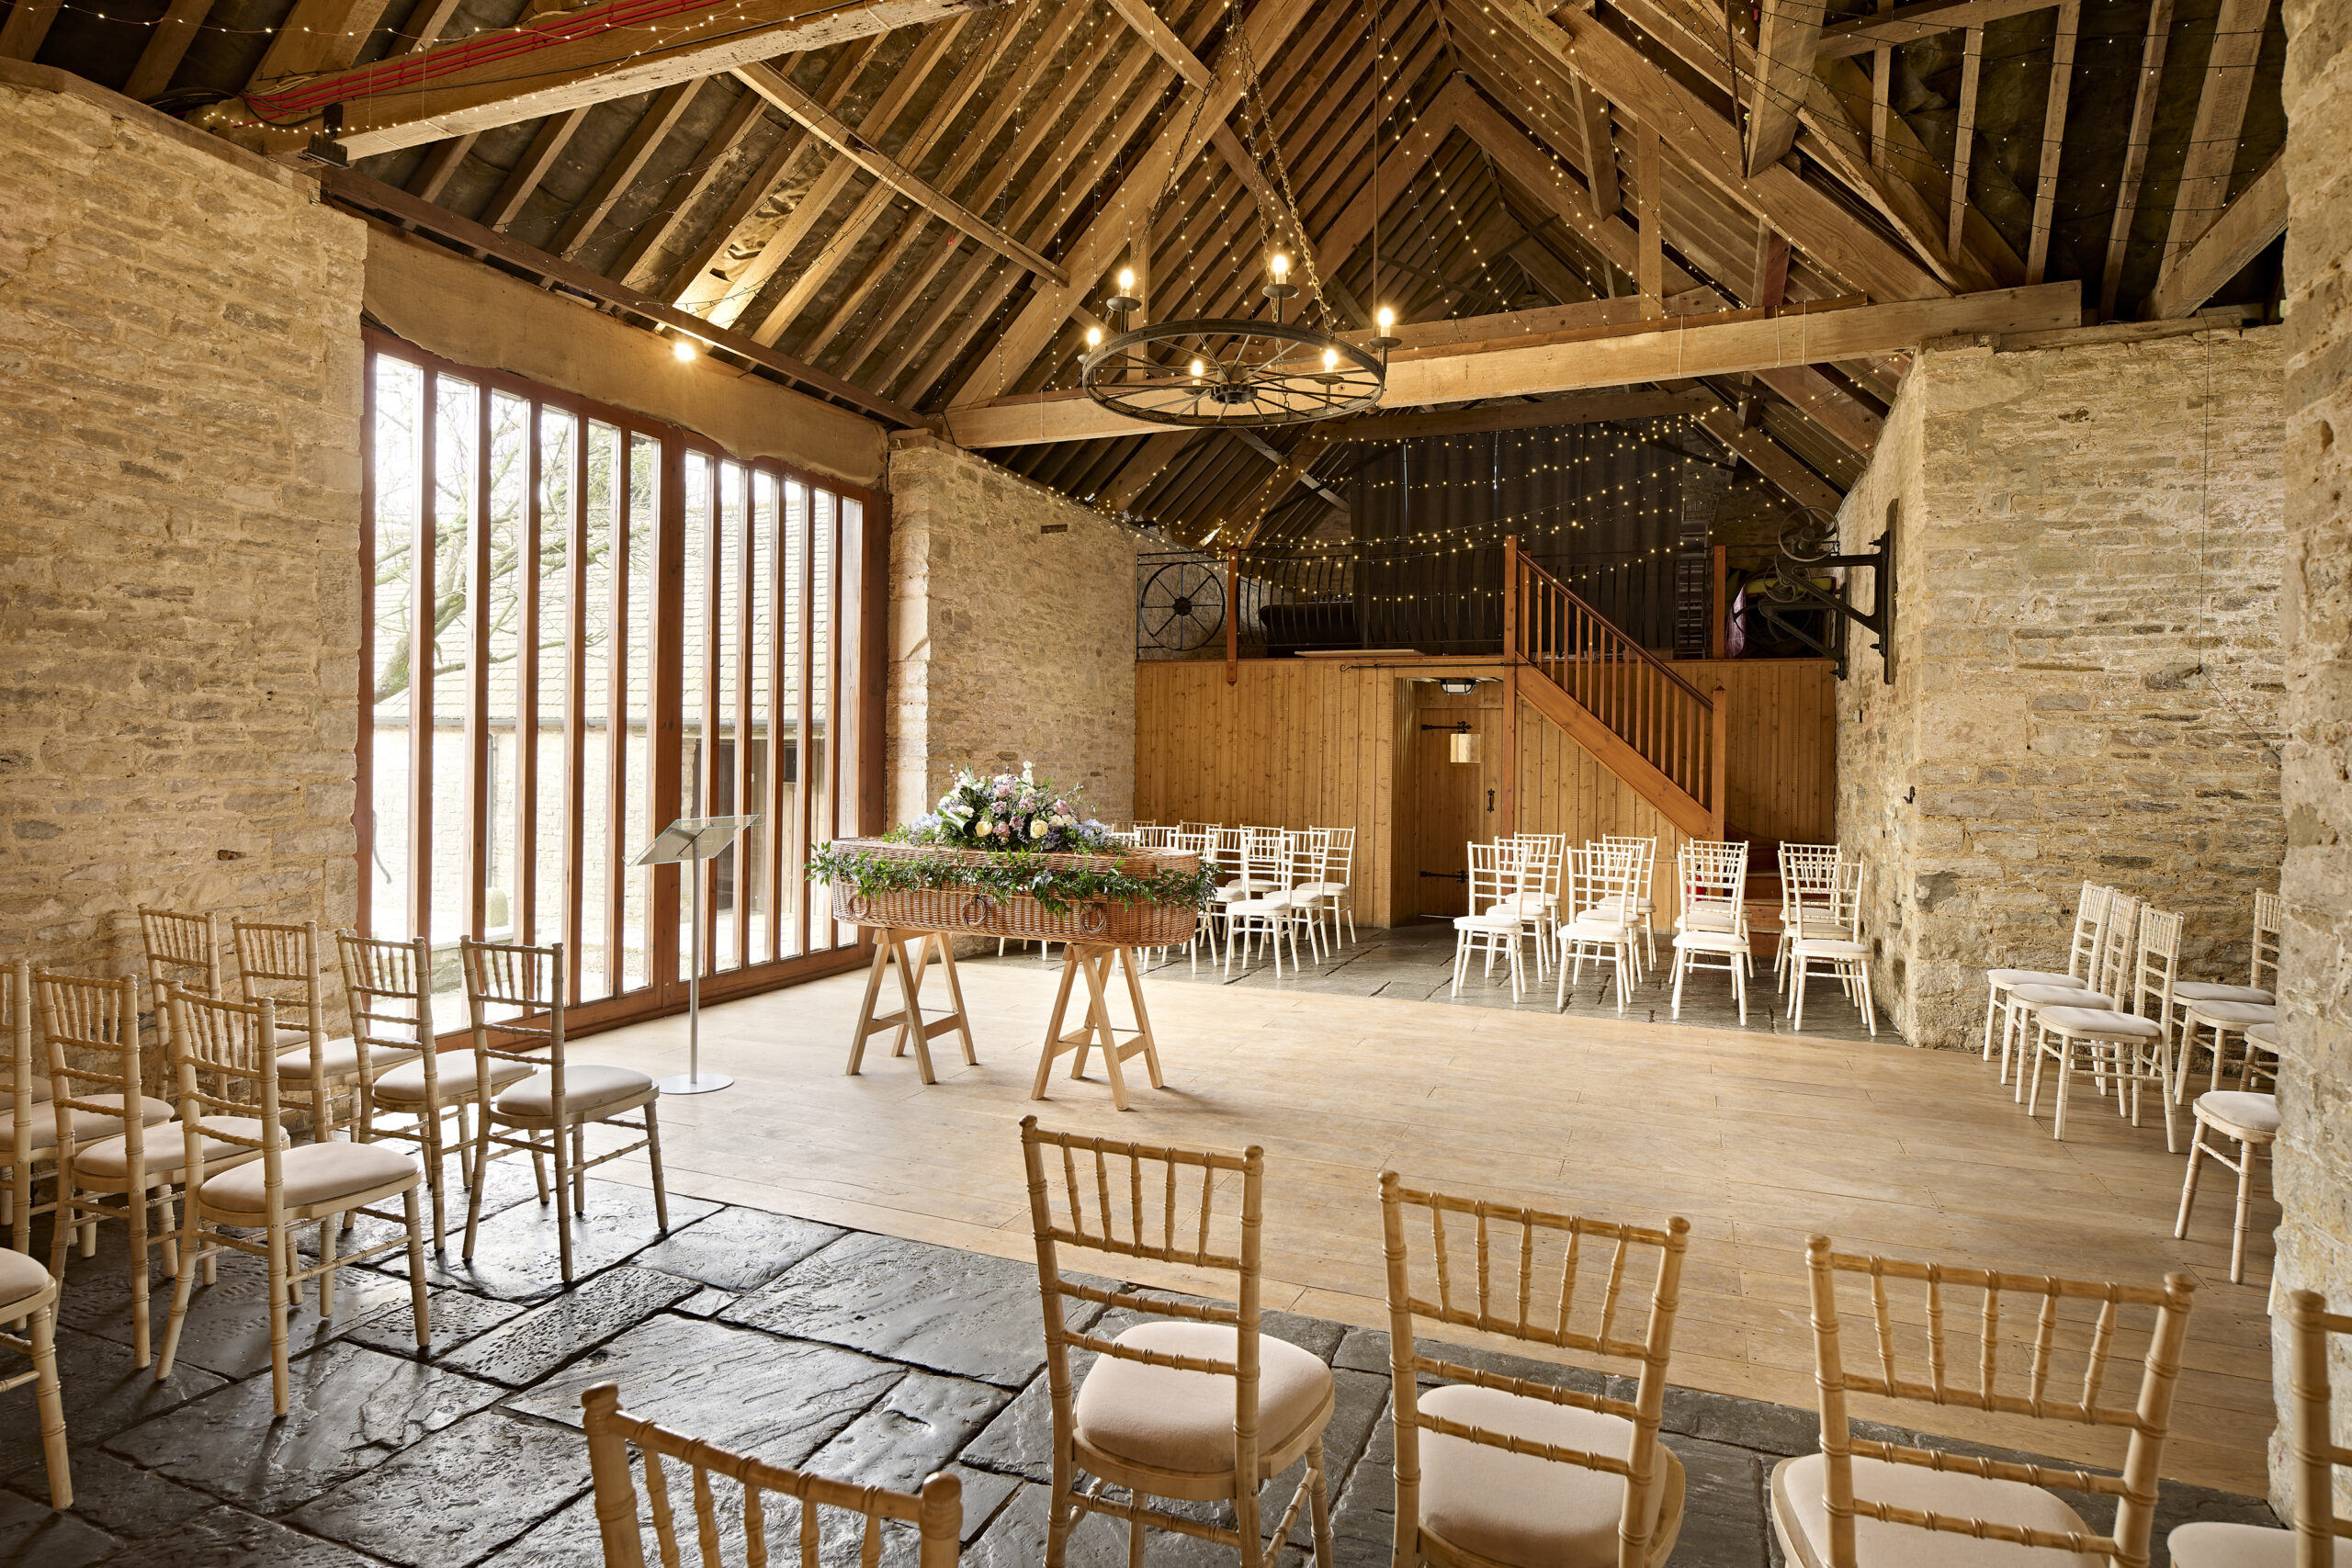 Indoor funeral service at Kingston Country Courtyard in Dorset.